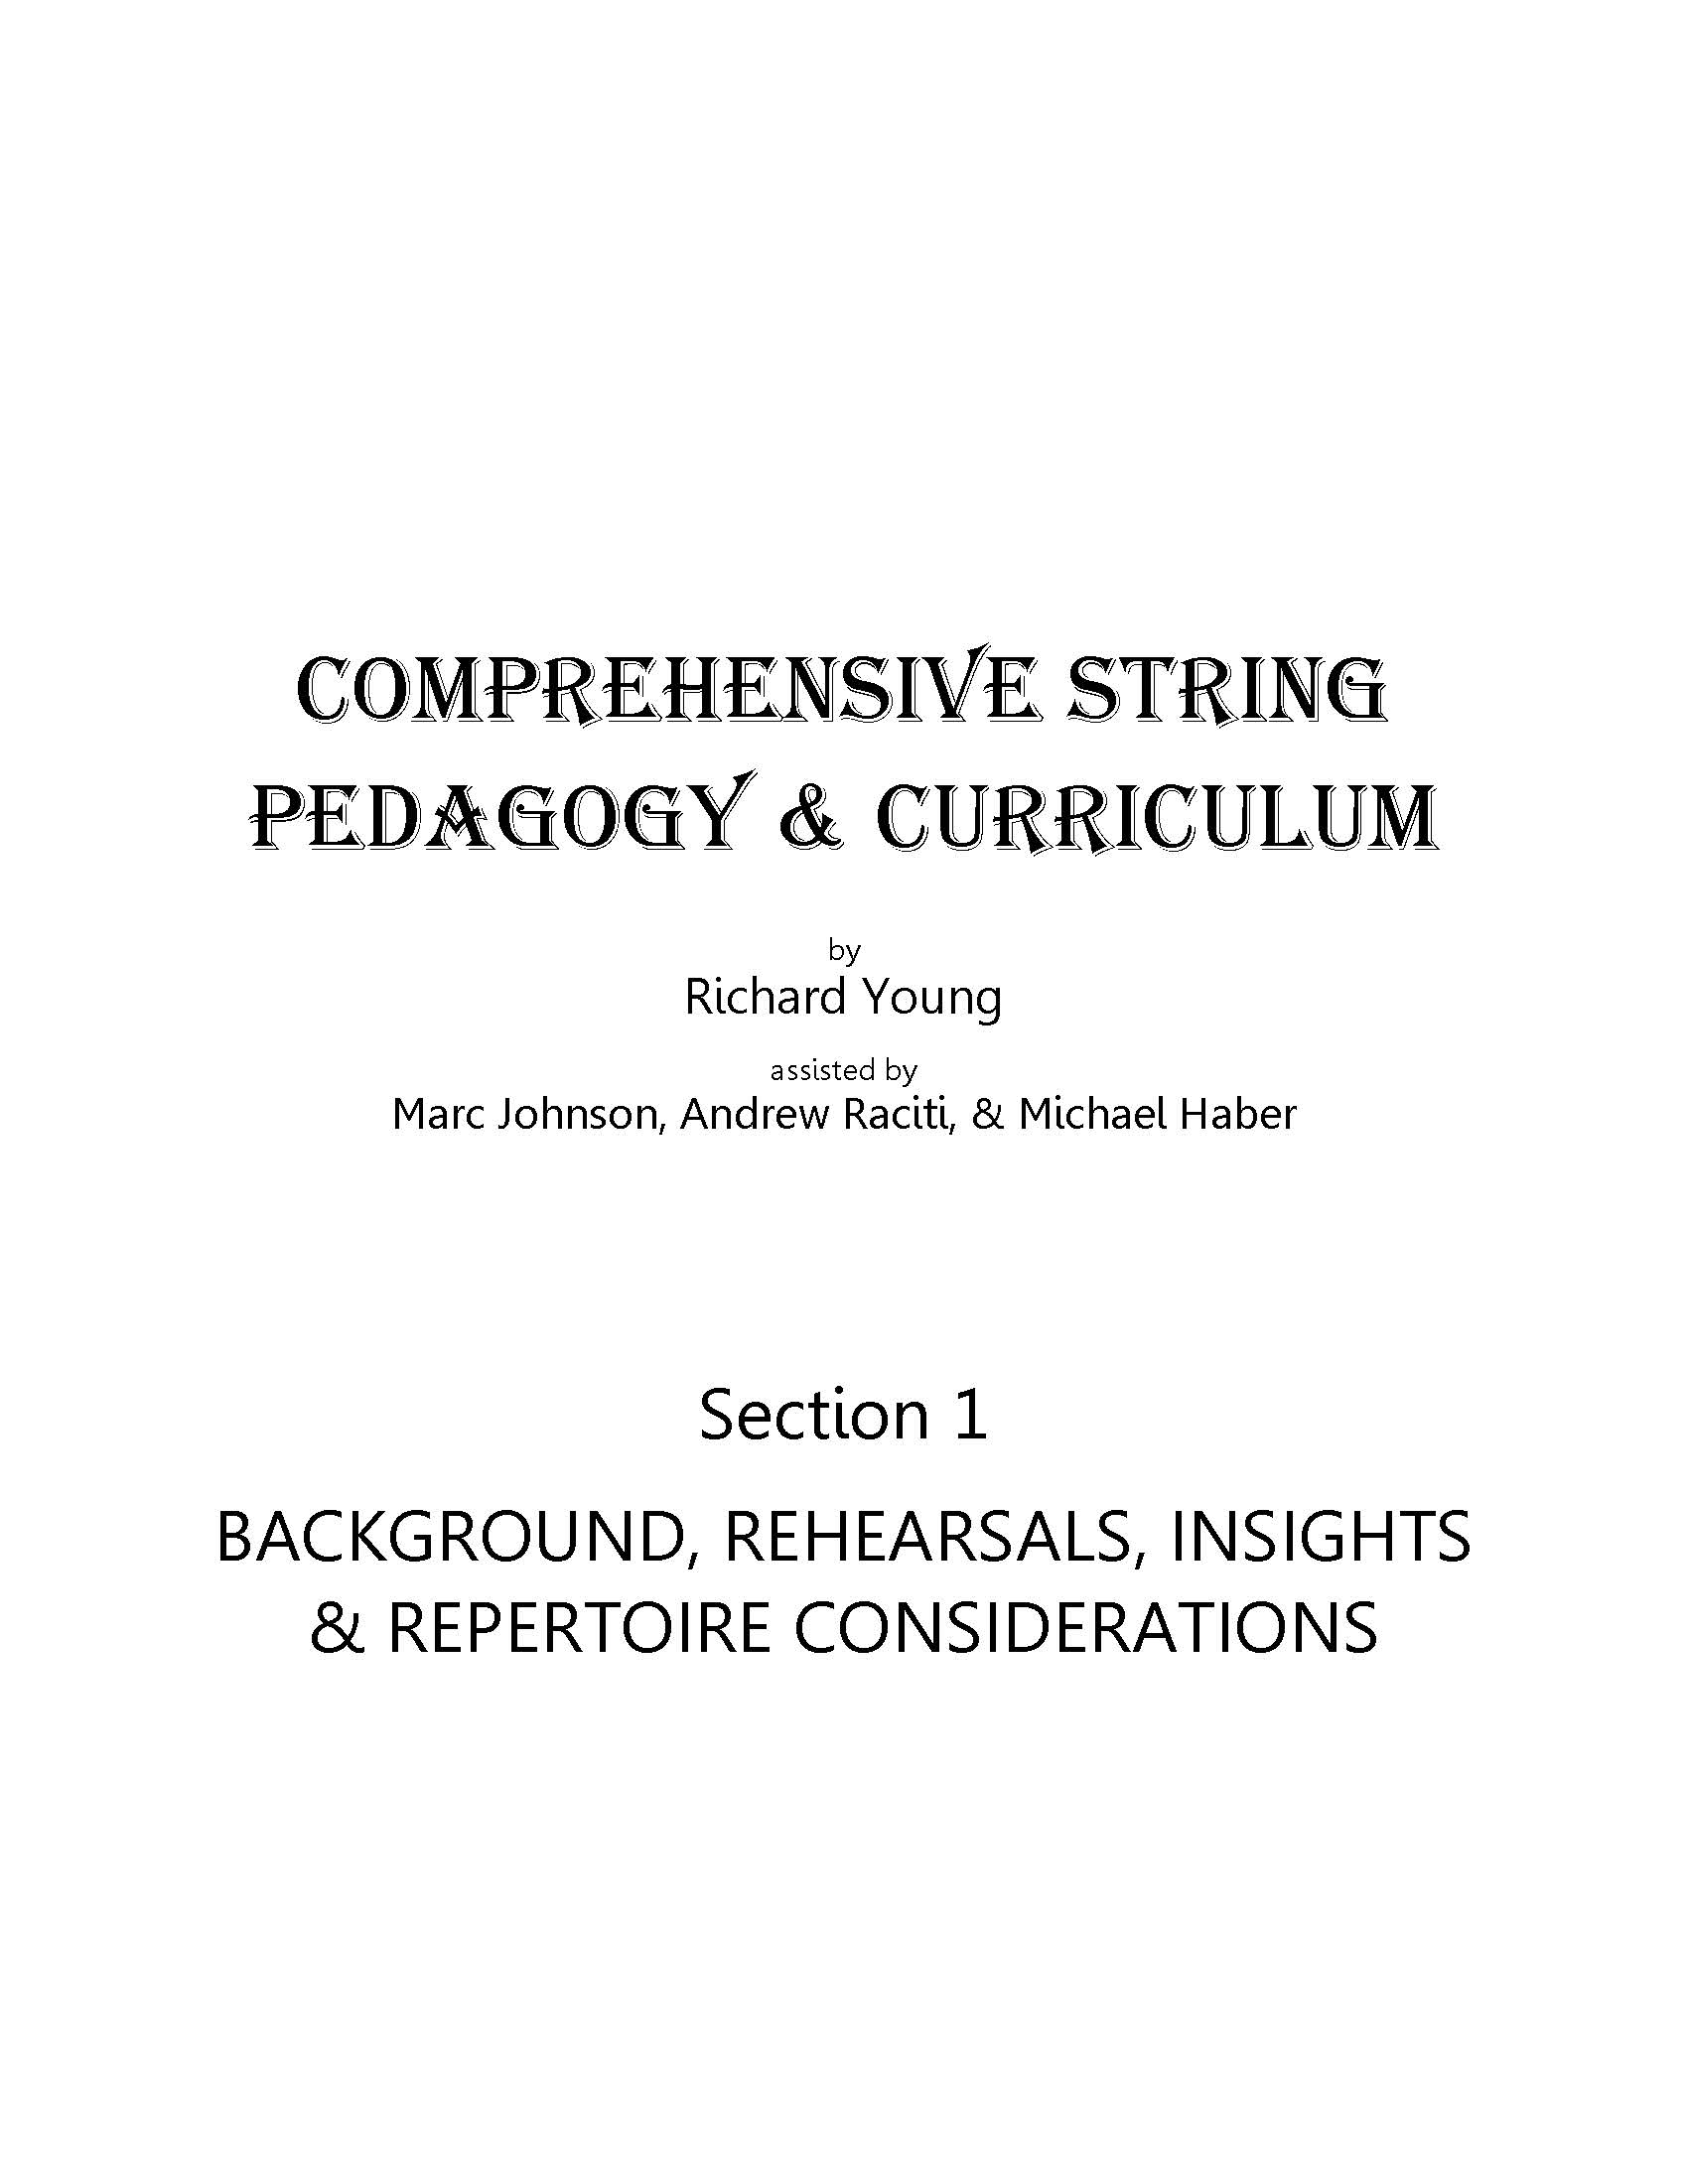 Comprehensive String Pedagogy & Curriculum Volume 1 and 2 by Richard Young